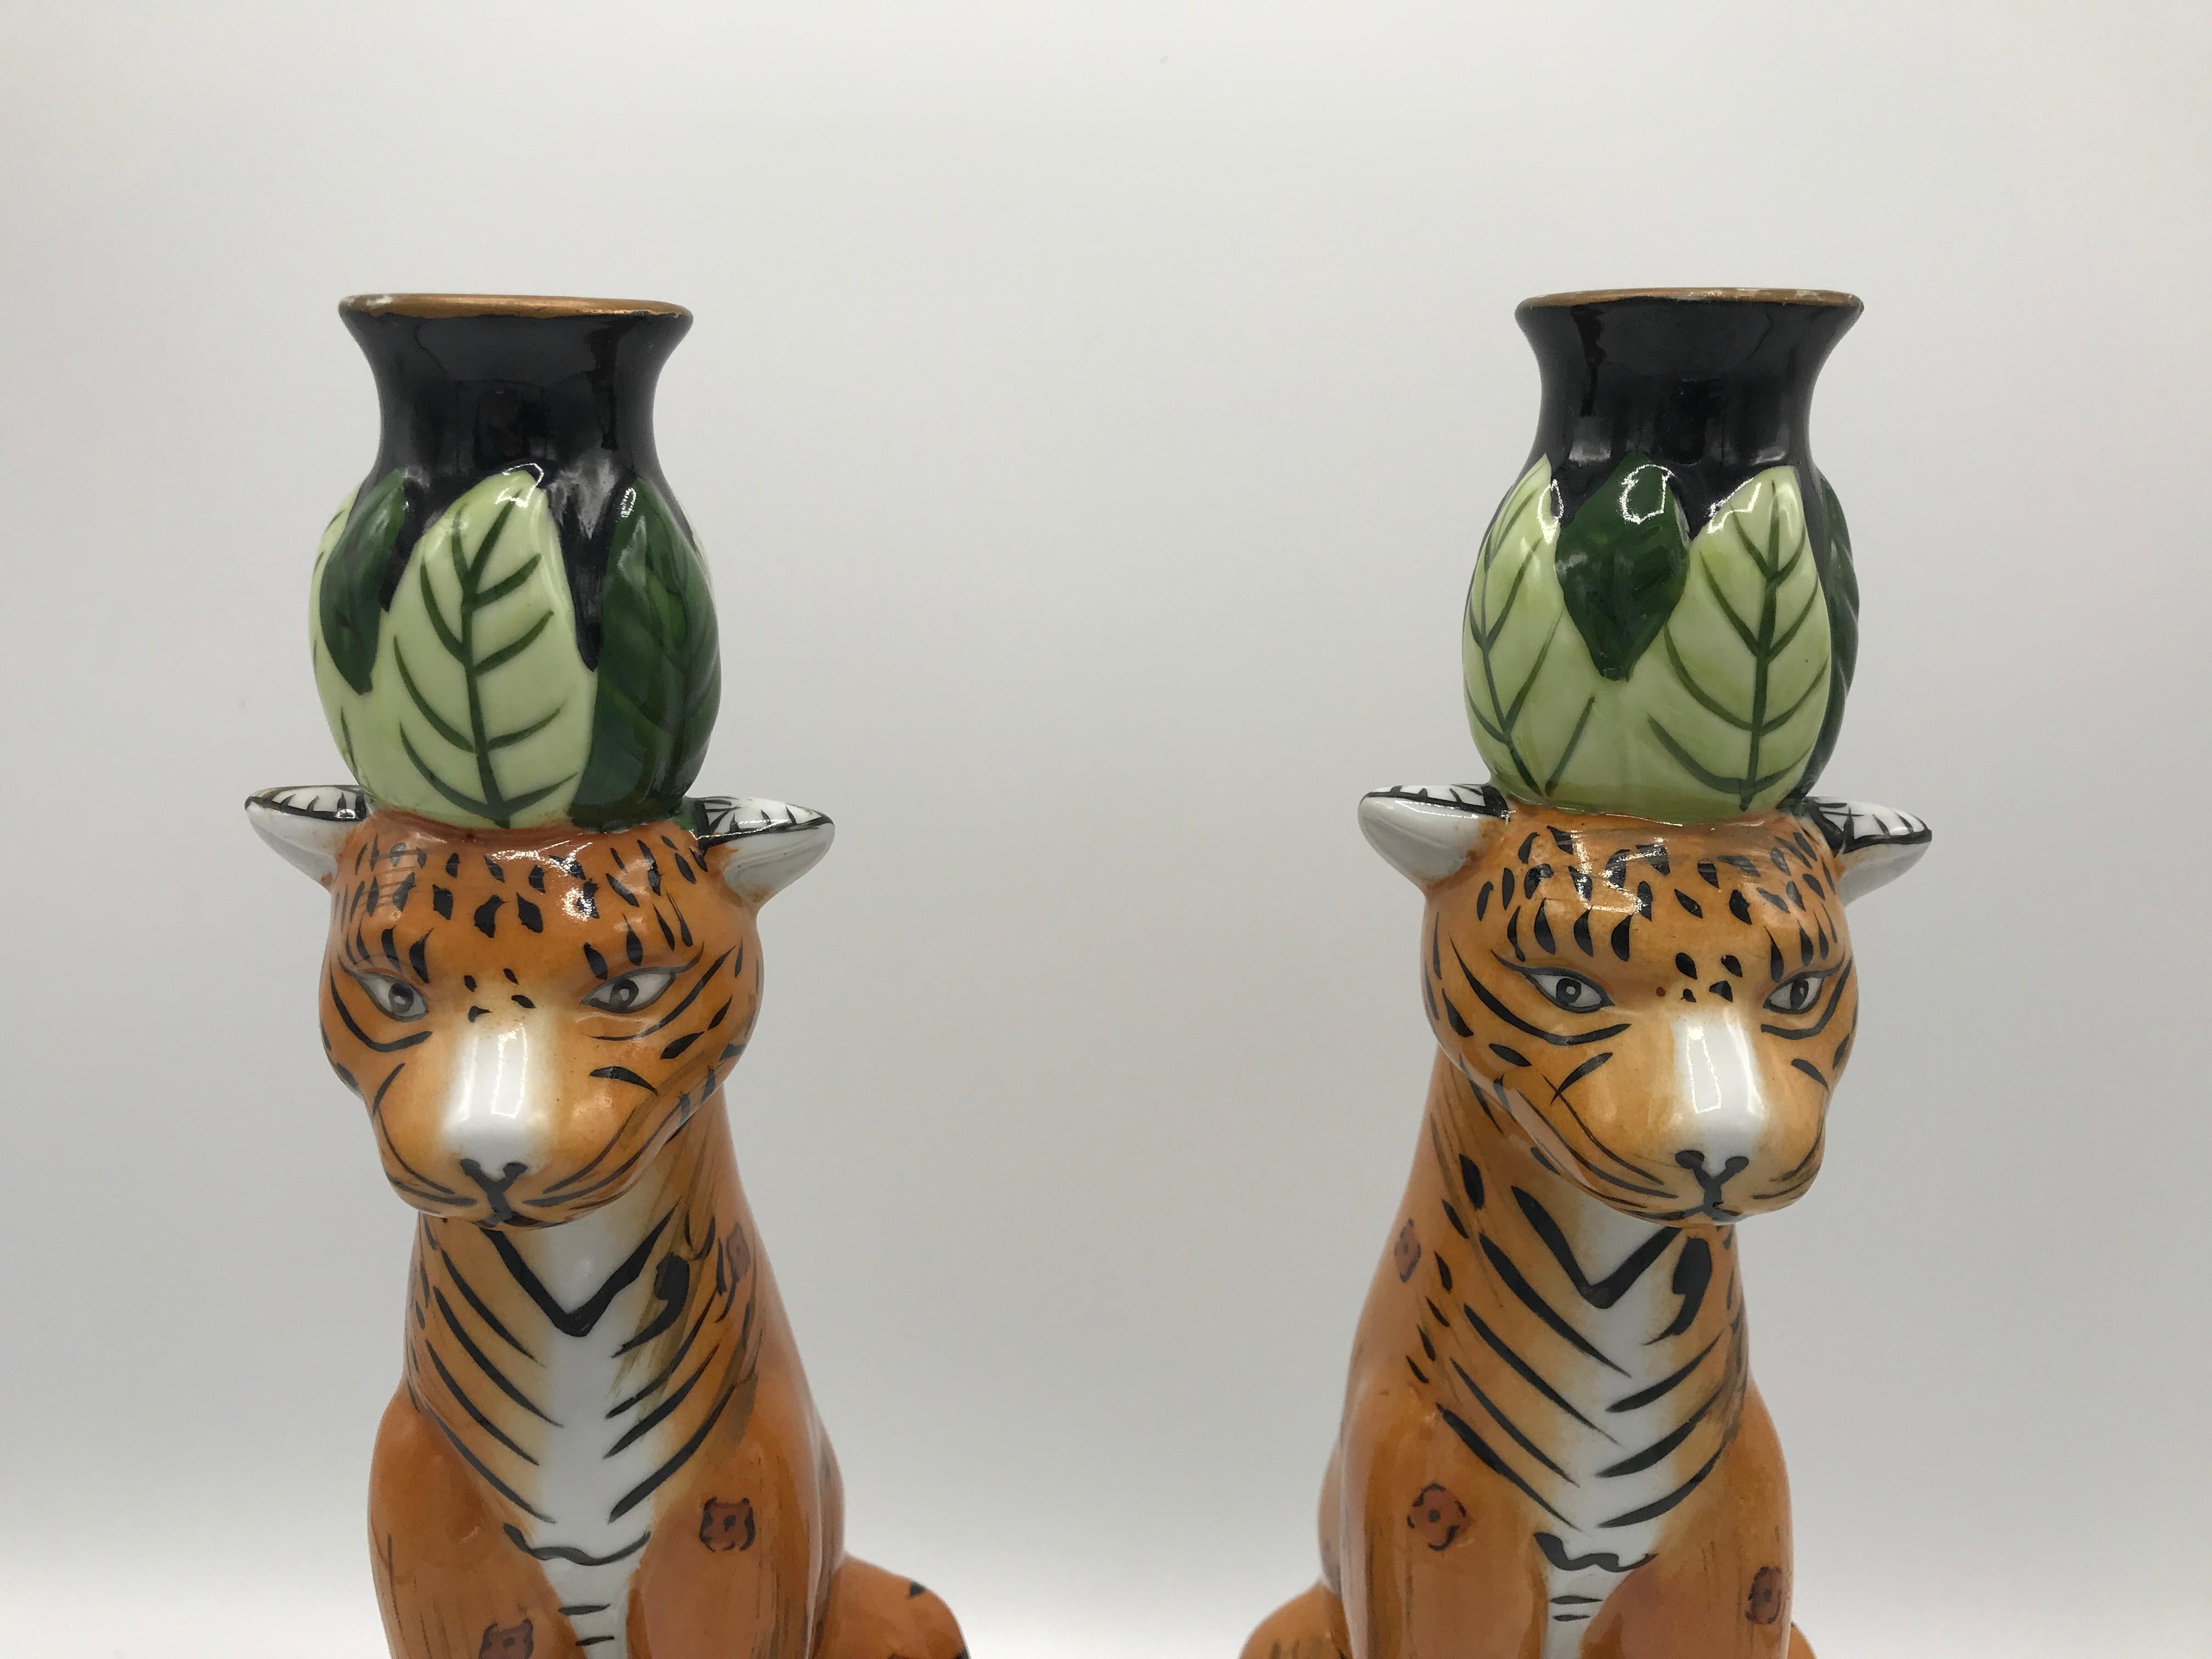 Offered is a fabulous, pair of 1980s painted porcelain candlestick holders. The pair has a beautiful, perched leopard sculpture with the candleholder above its head. Heavy, 3.5lbs for the pair.